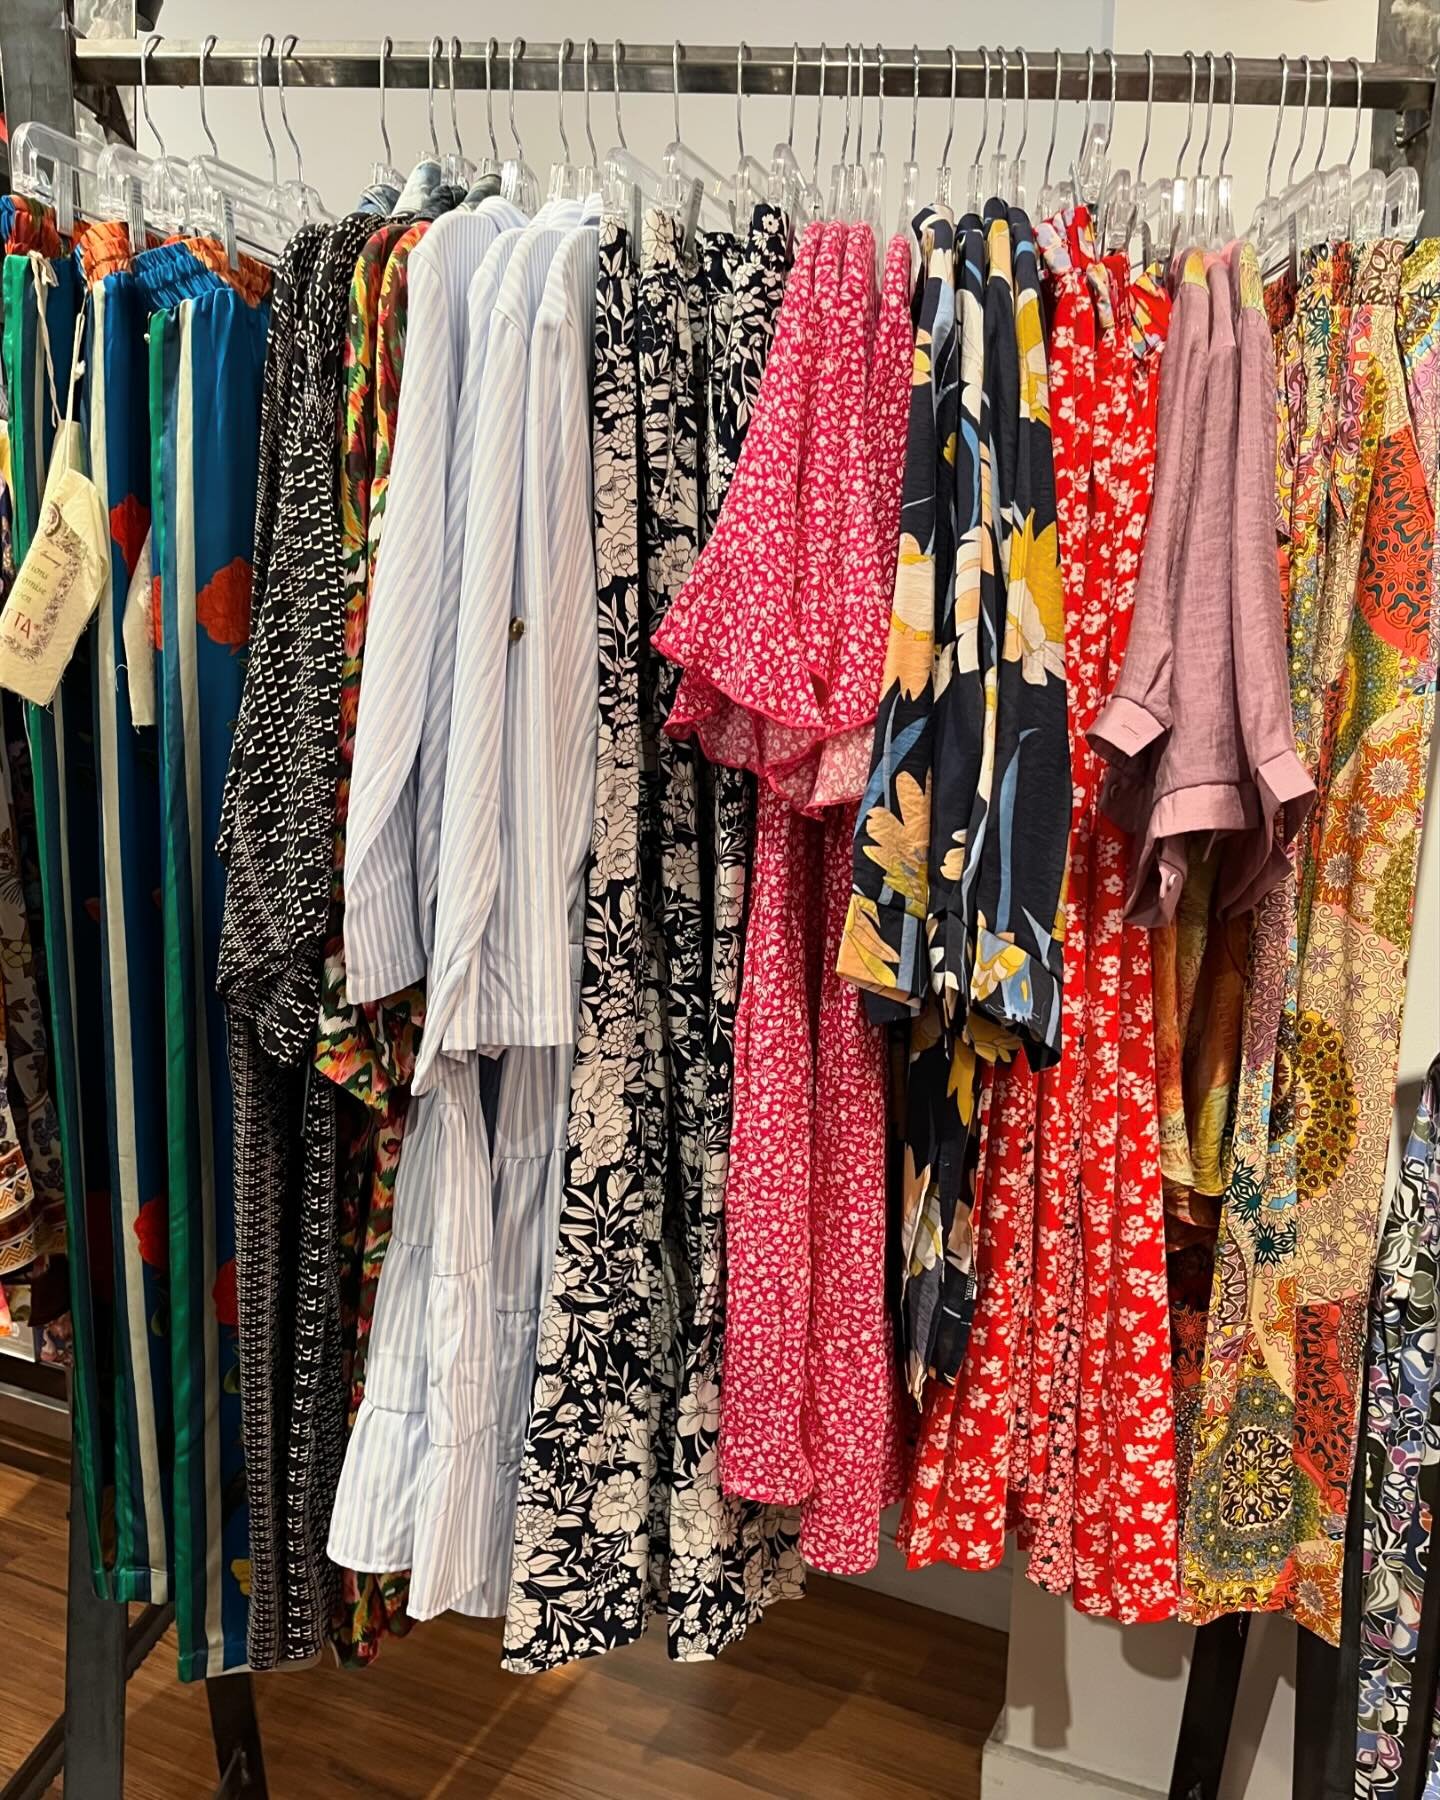 So many spring &amp; summer arrivals are coming in, come shop with us!! #newarrivals #springclothes #summerclothes #womensclothingboutique #shoplocal #theresnoplacelikehome #downtowndurango #durango #colorado